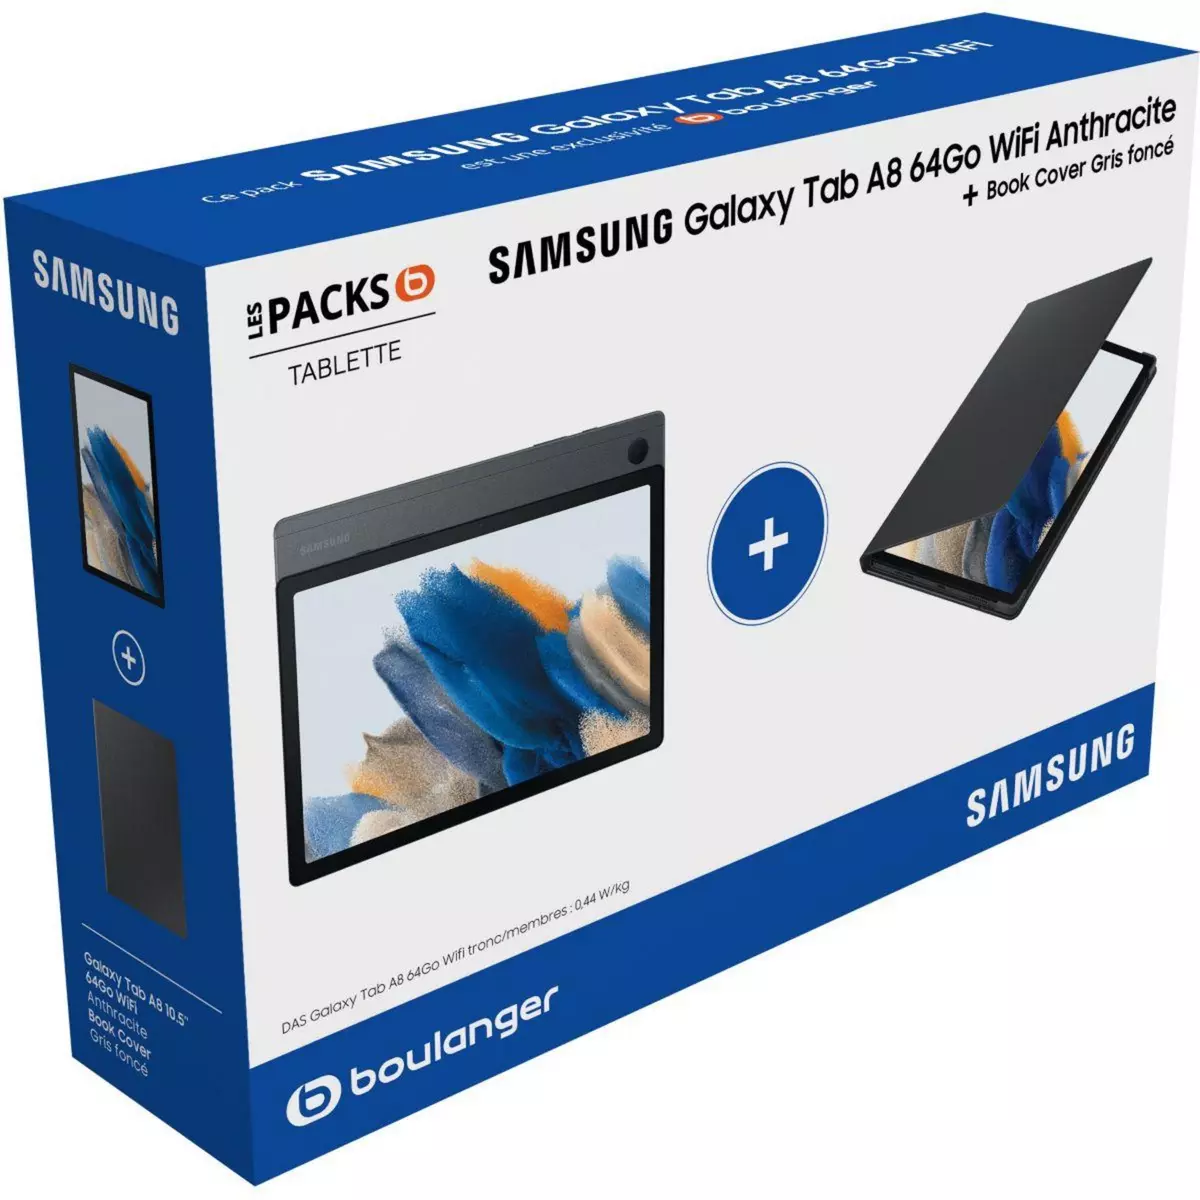 Samsung Tablette Android Pack Galaxy Tab A8 64Go WiFi+Book Cover